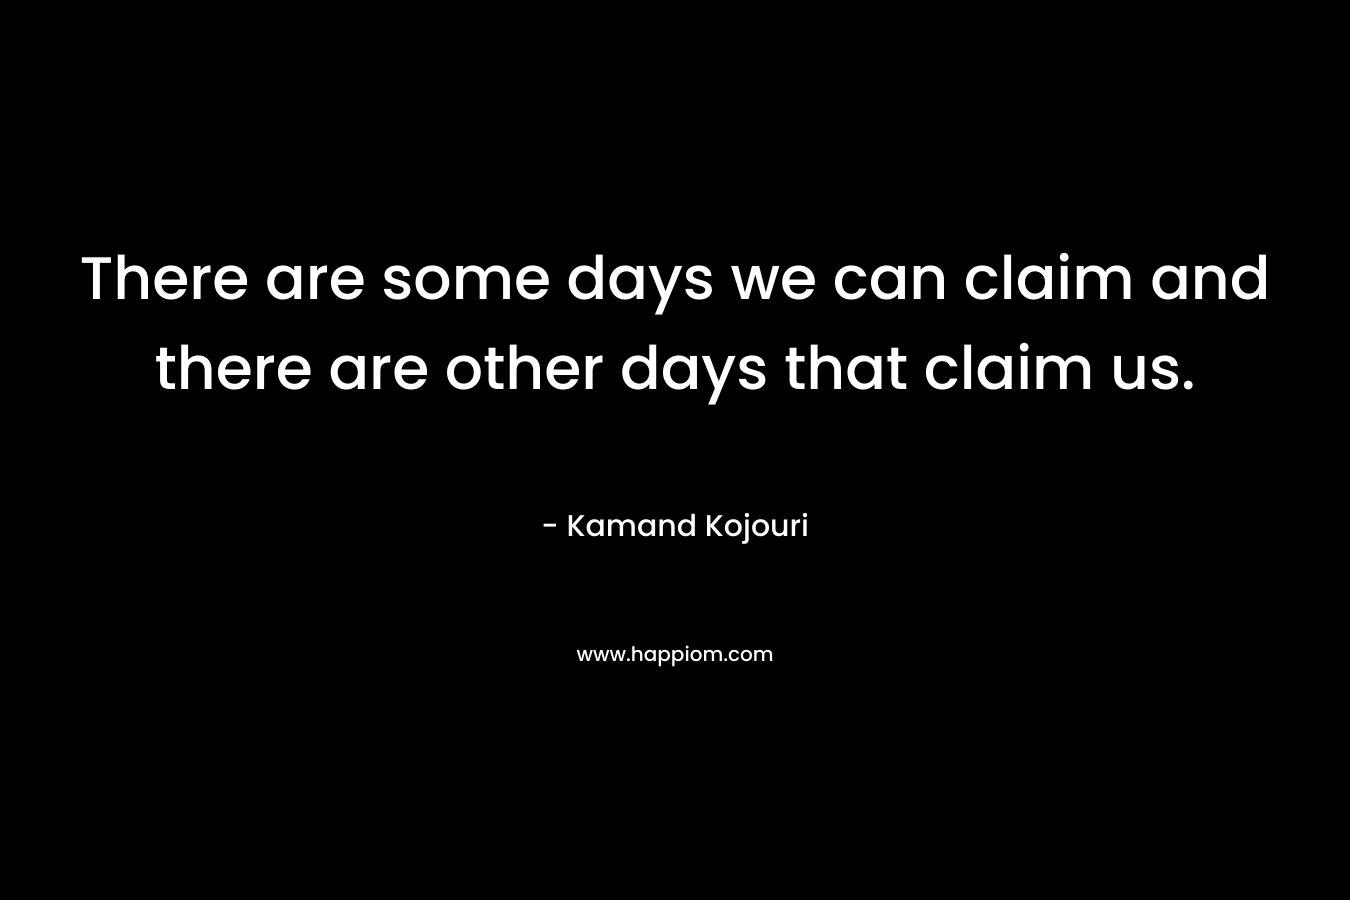 There are some days we can claim and there are other days that claim us. – Kamand Kojouri